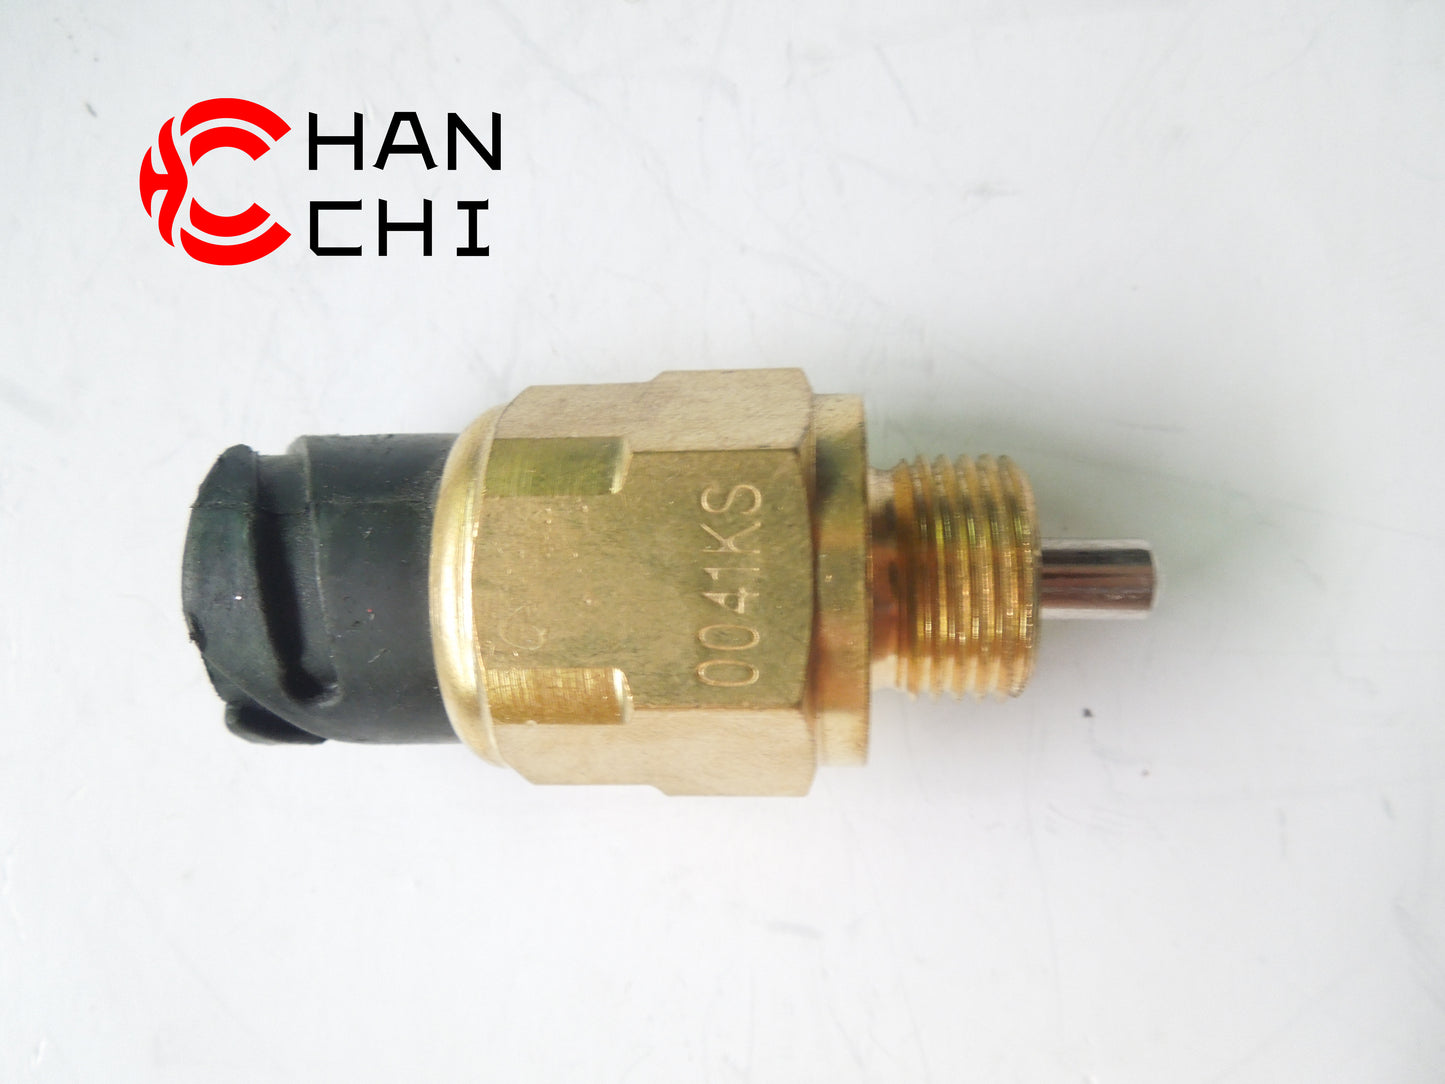 OEM: 0041KS FAW FASTMaterial: metalColor: black goldenOrigin: Made in ChinaWeight: 50gPacking List: 1* Neutral Switch More Service We can provide OEM Manufacturing service We can Be your one-step solution for Auto Parts We can provide technical scheme for you Feel Free to Contact Us, We will get back to you as soon as possible.